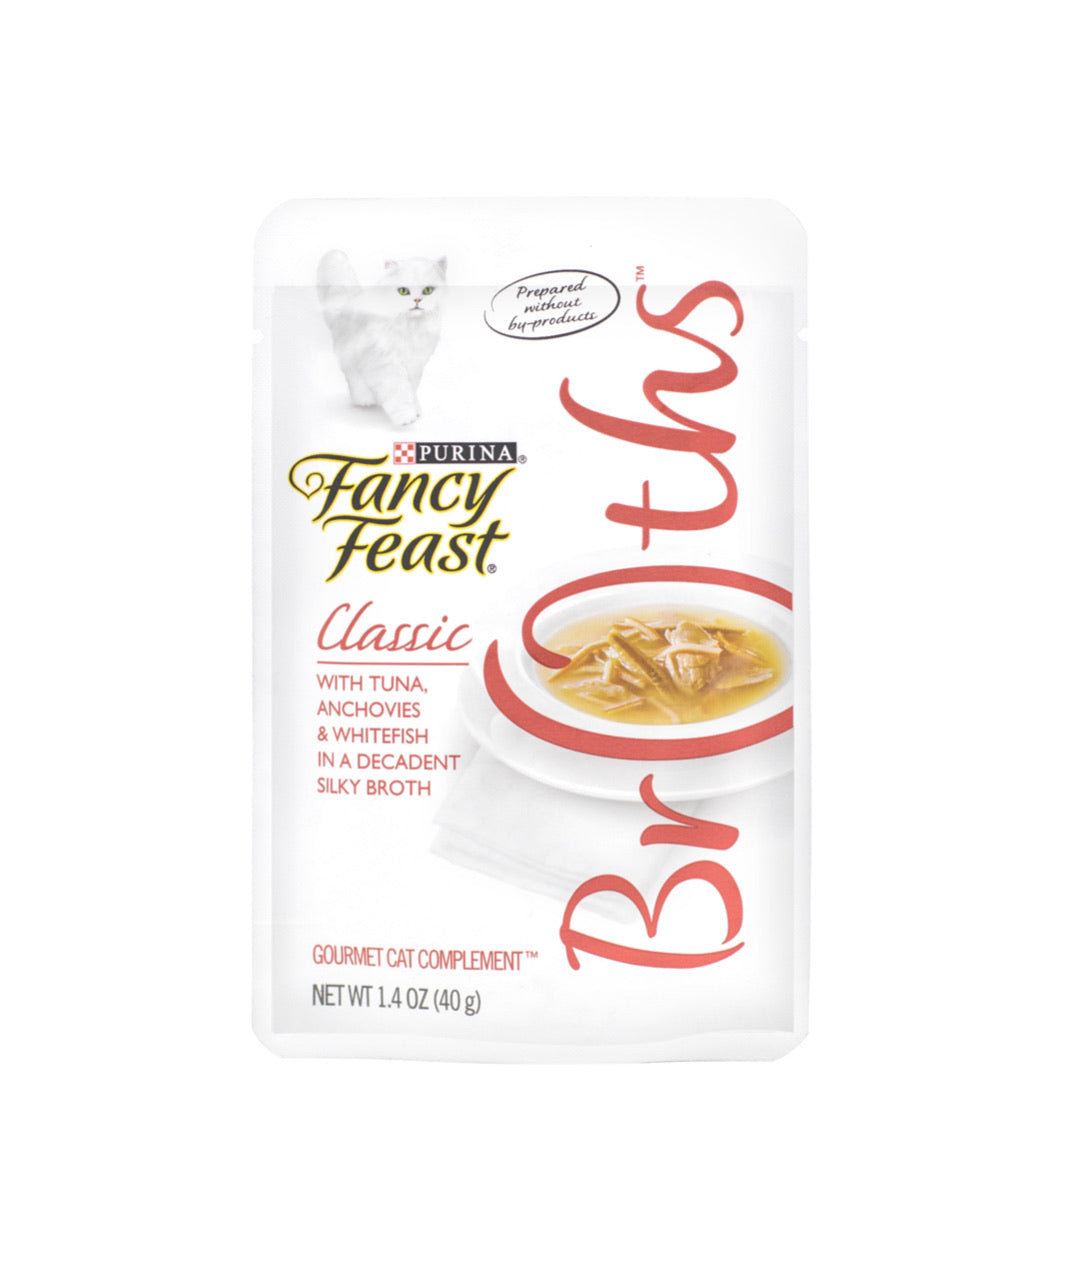 Fancy Feast Classic Broths with Tuna, Anchovies & Whitefish in a Decadent Silky Broth (40g)